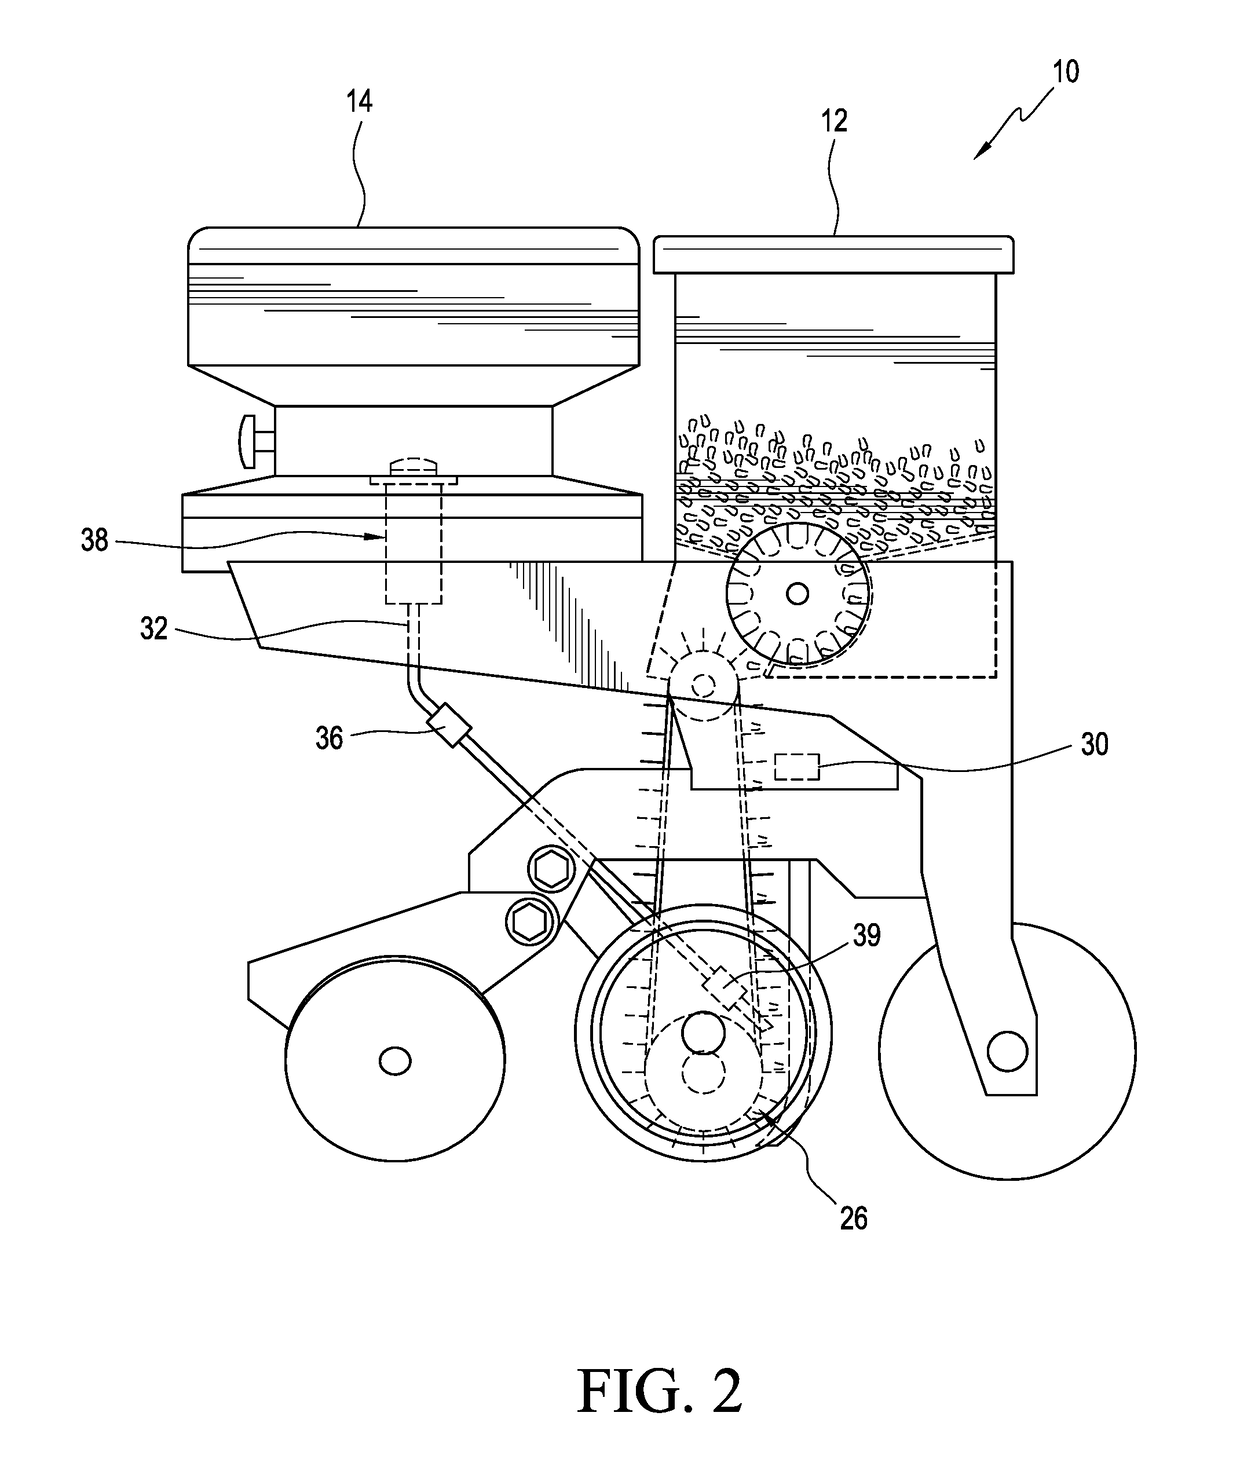 Electronically pulsing agricultural product with seed utilizing seed transport mechanism